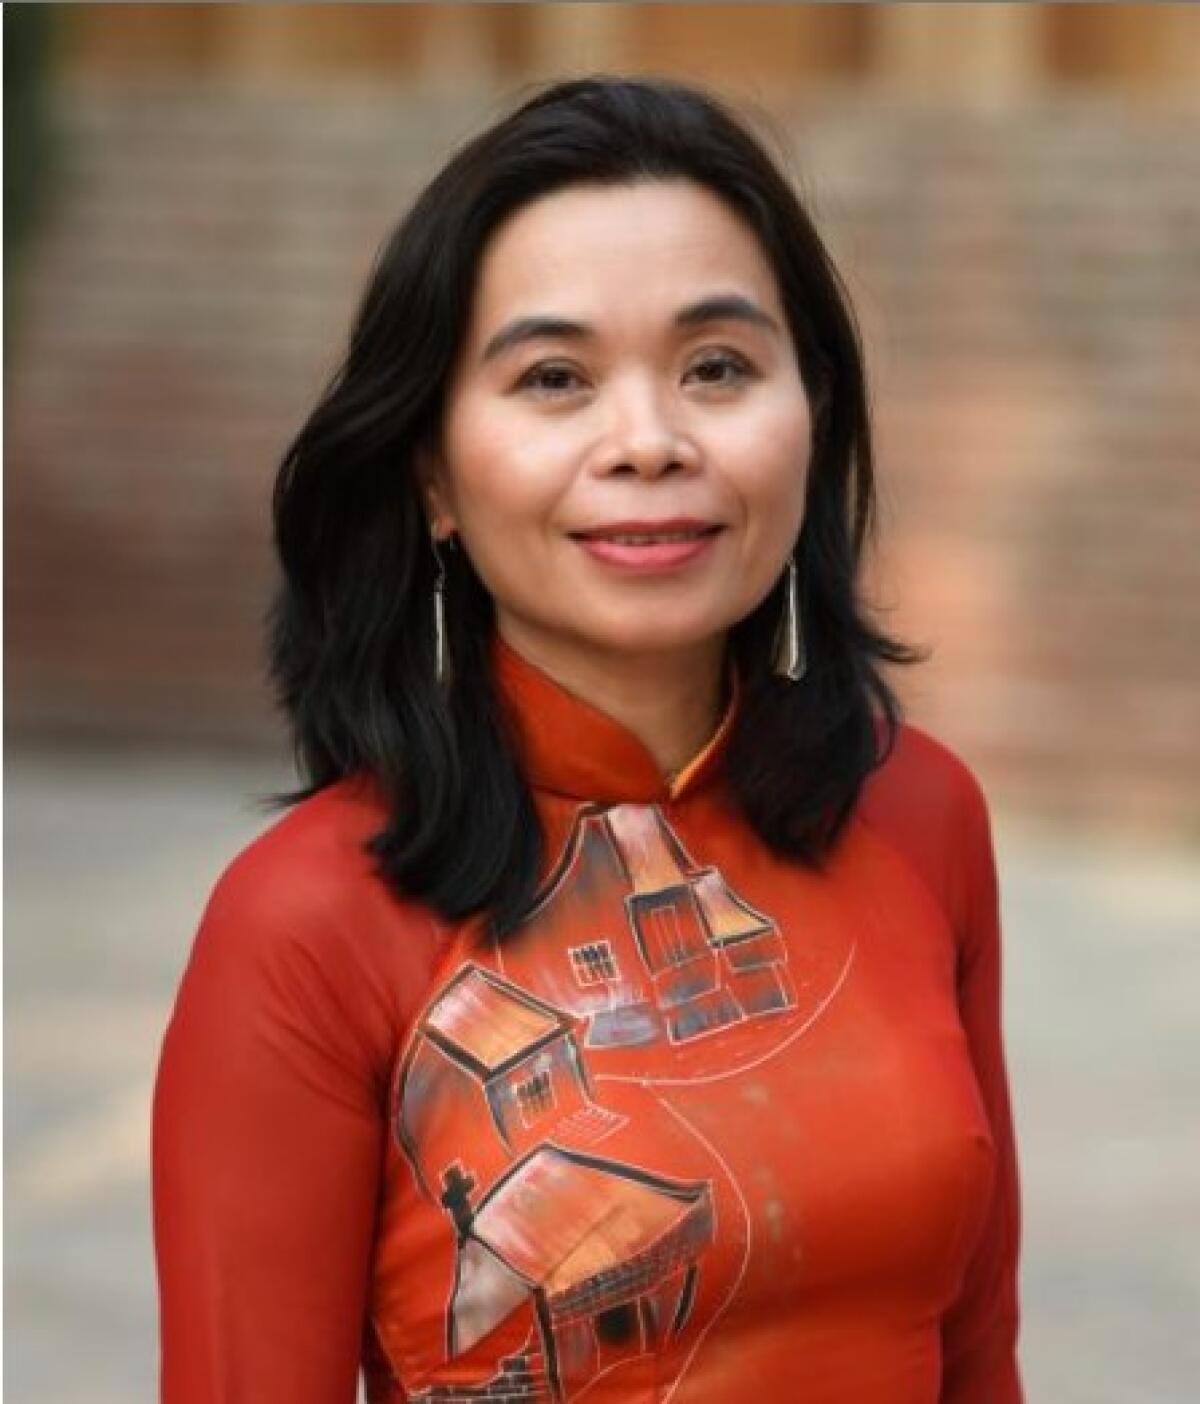 Author Nguyen Phan Quế Mai will appear Thursday, April 25, at Warwick's bookstore in La Jolla.